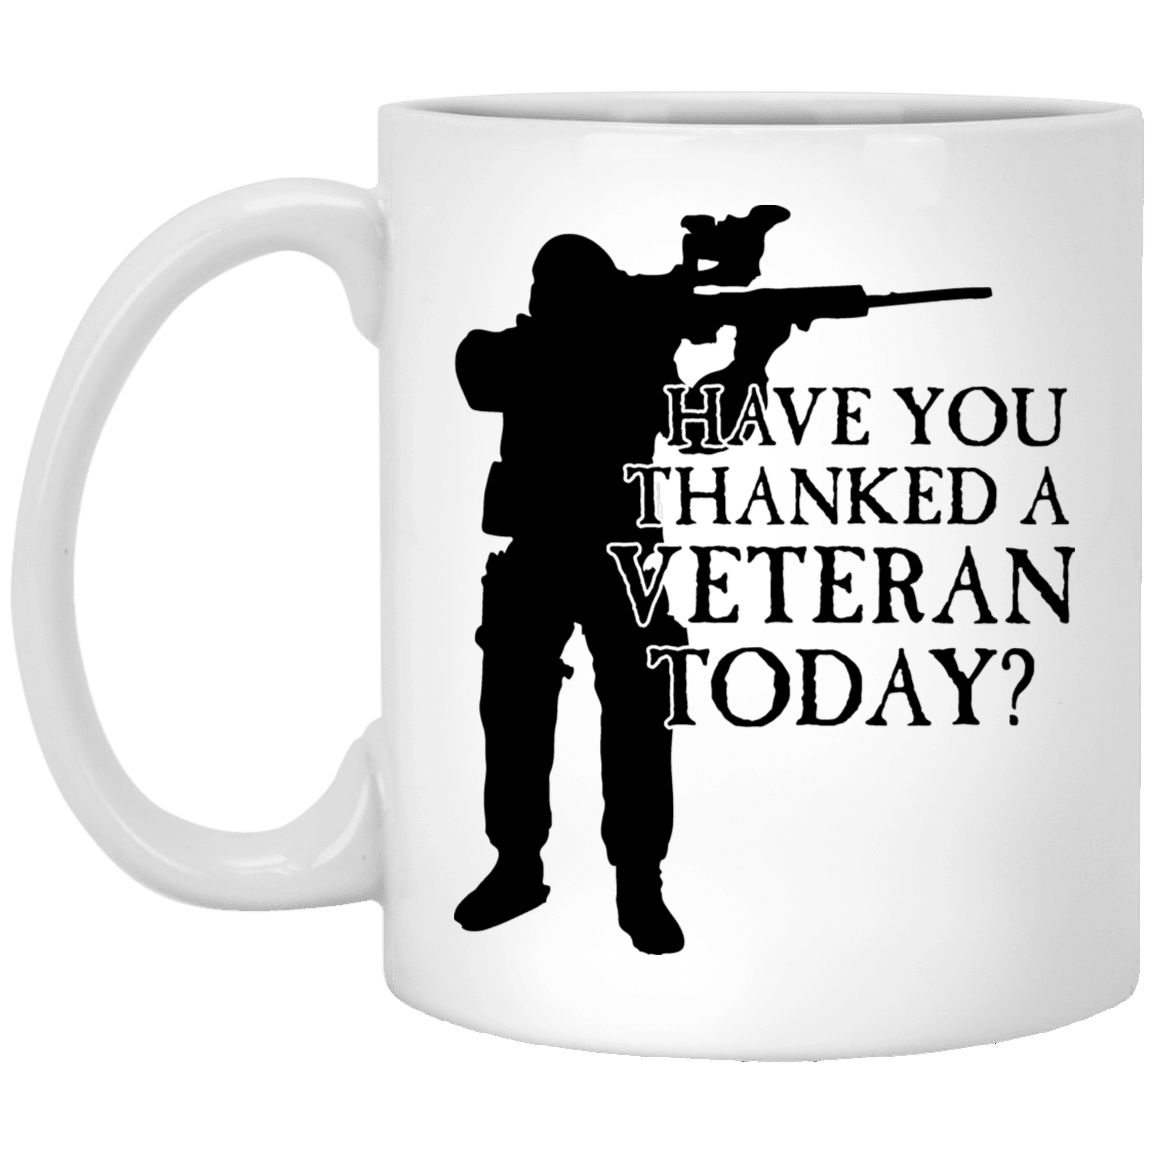 Designs by MyUtopia Shout Out:Have You Thanked A Veteran Today Ceramic Coffee Mugs - White,11 oz / White,Ceramic Coffee Mug